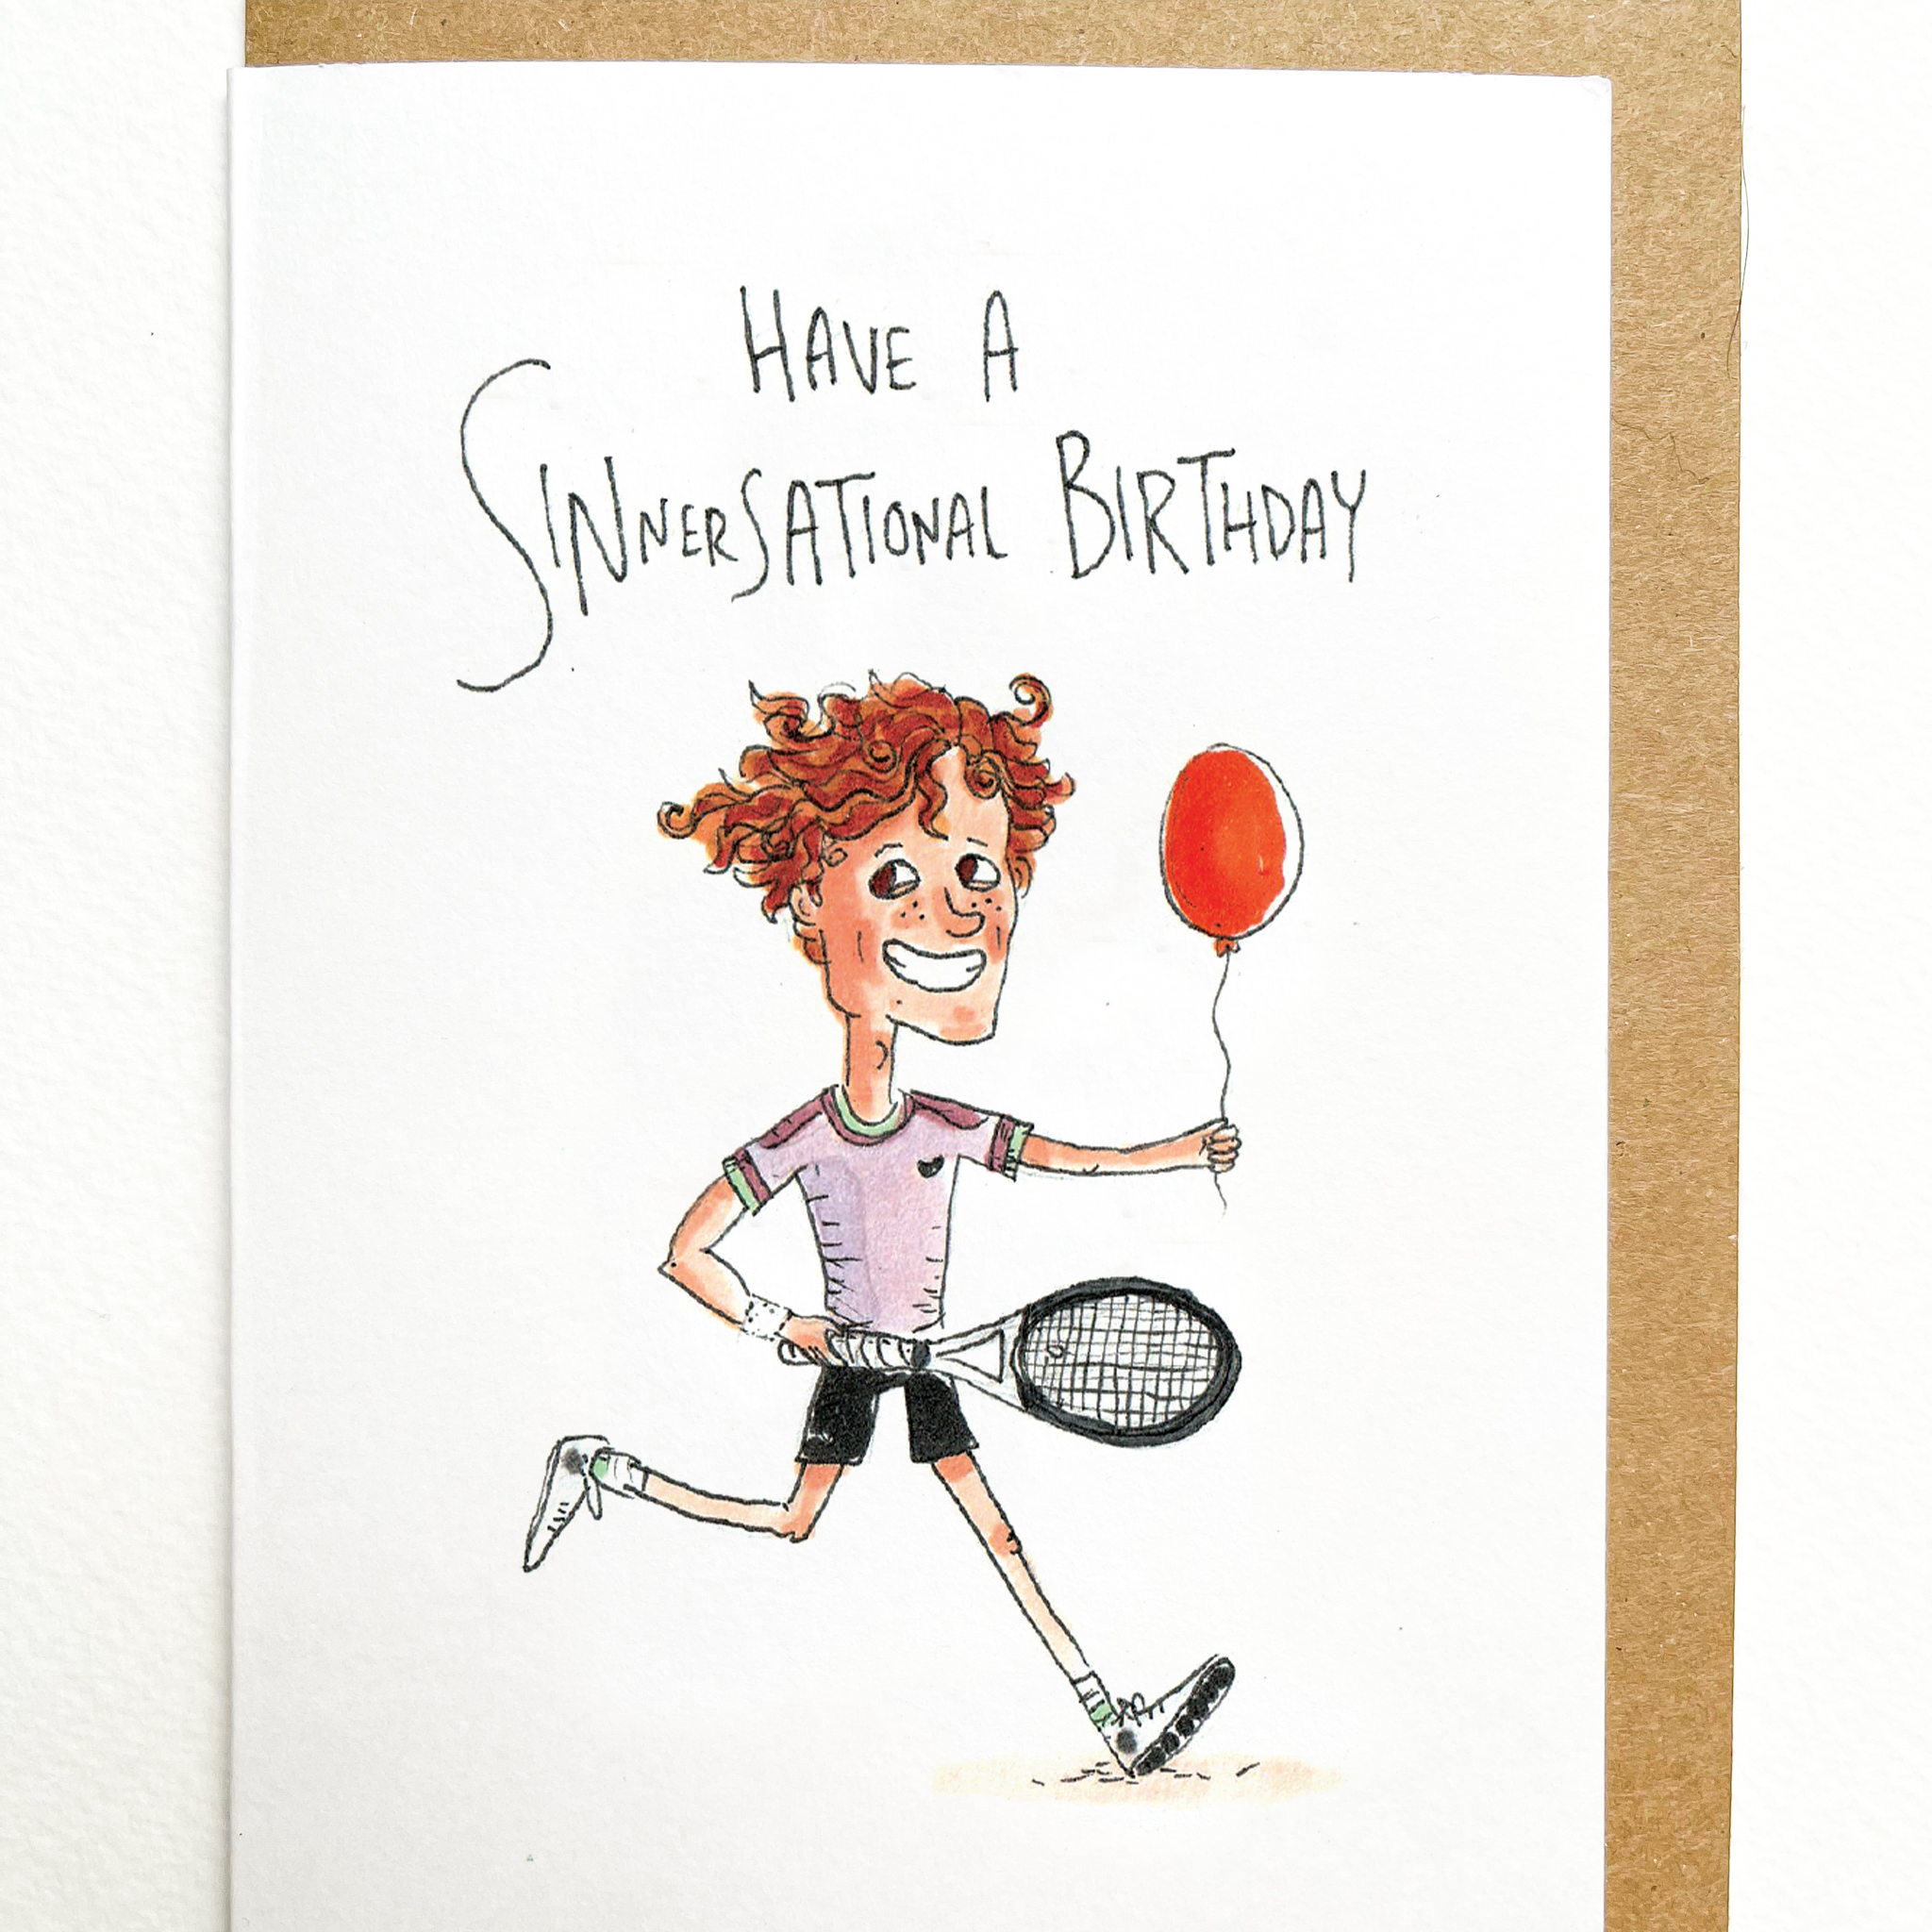 Have A Sinnersational Birthday - TENNIS FANS collection